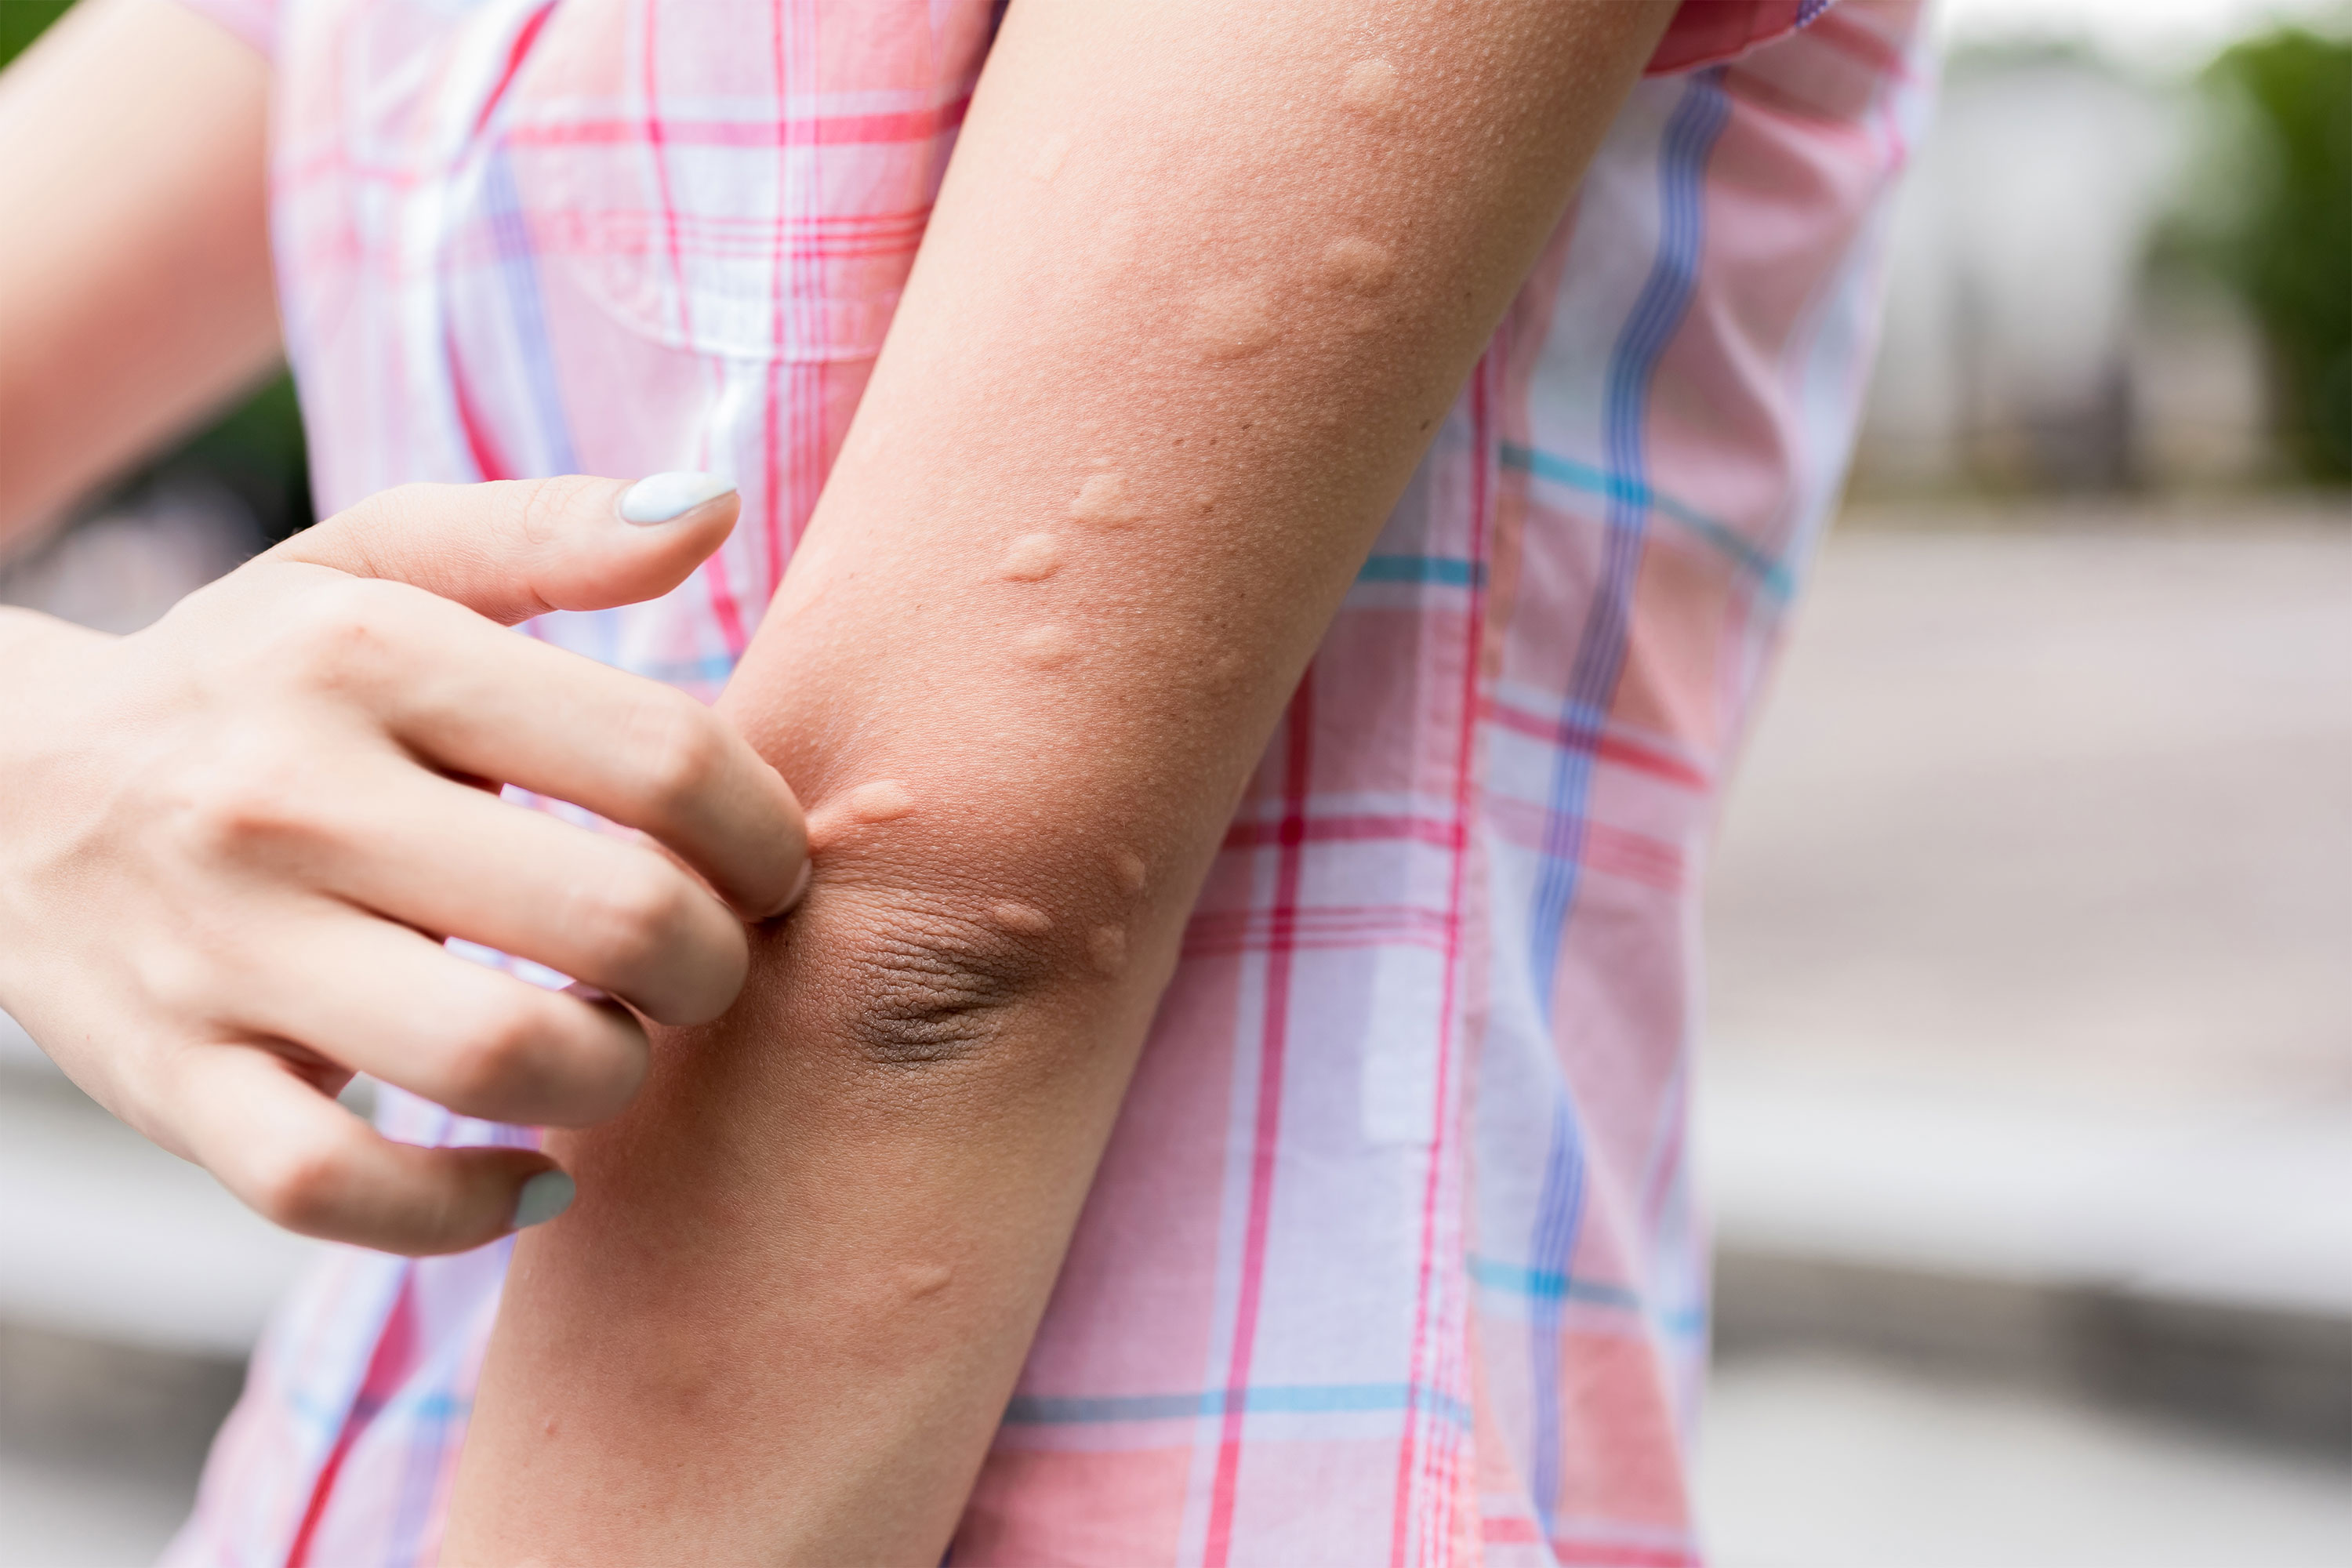 How to Tell the Difference Between Bug Bites, Heat Rash, and Hives